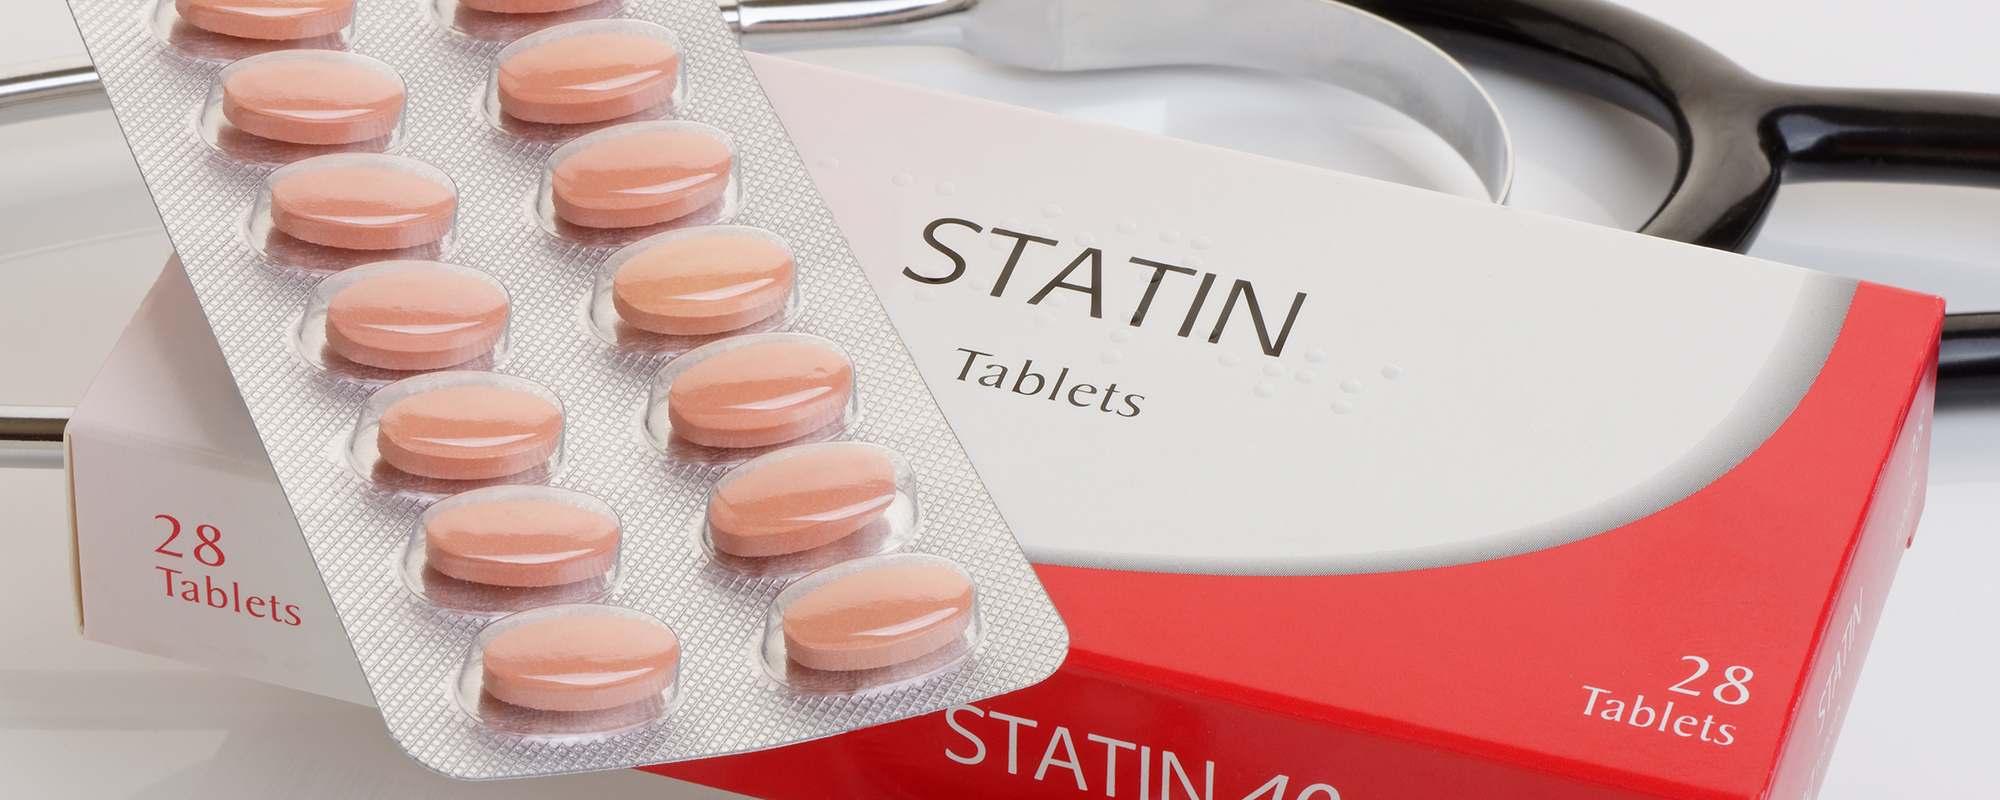 Statin tablets and a stethoscope